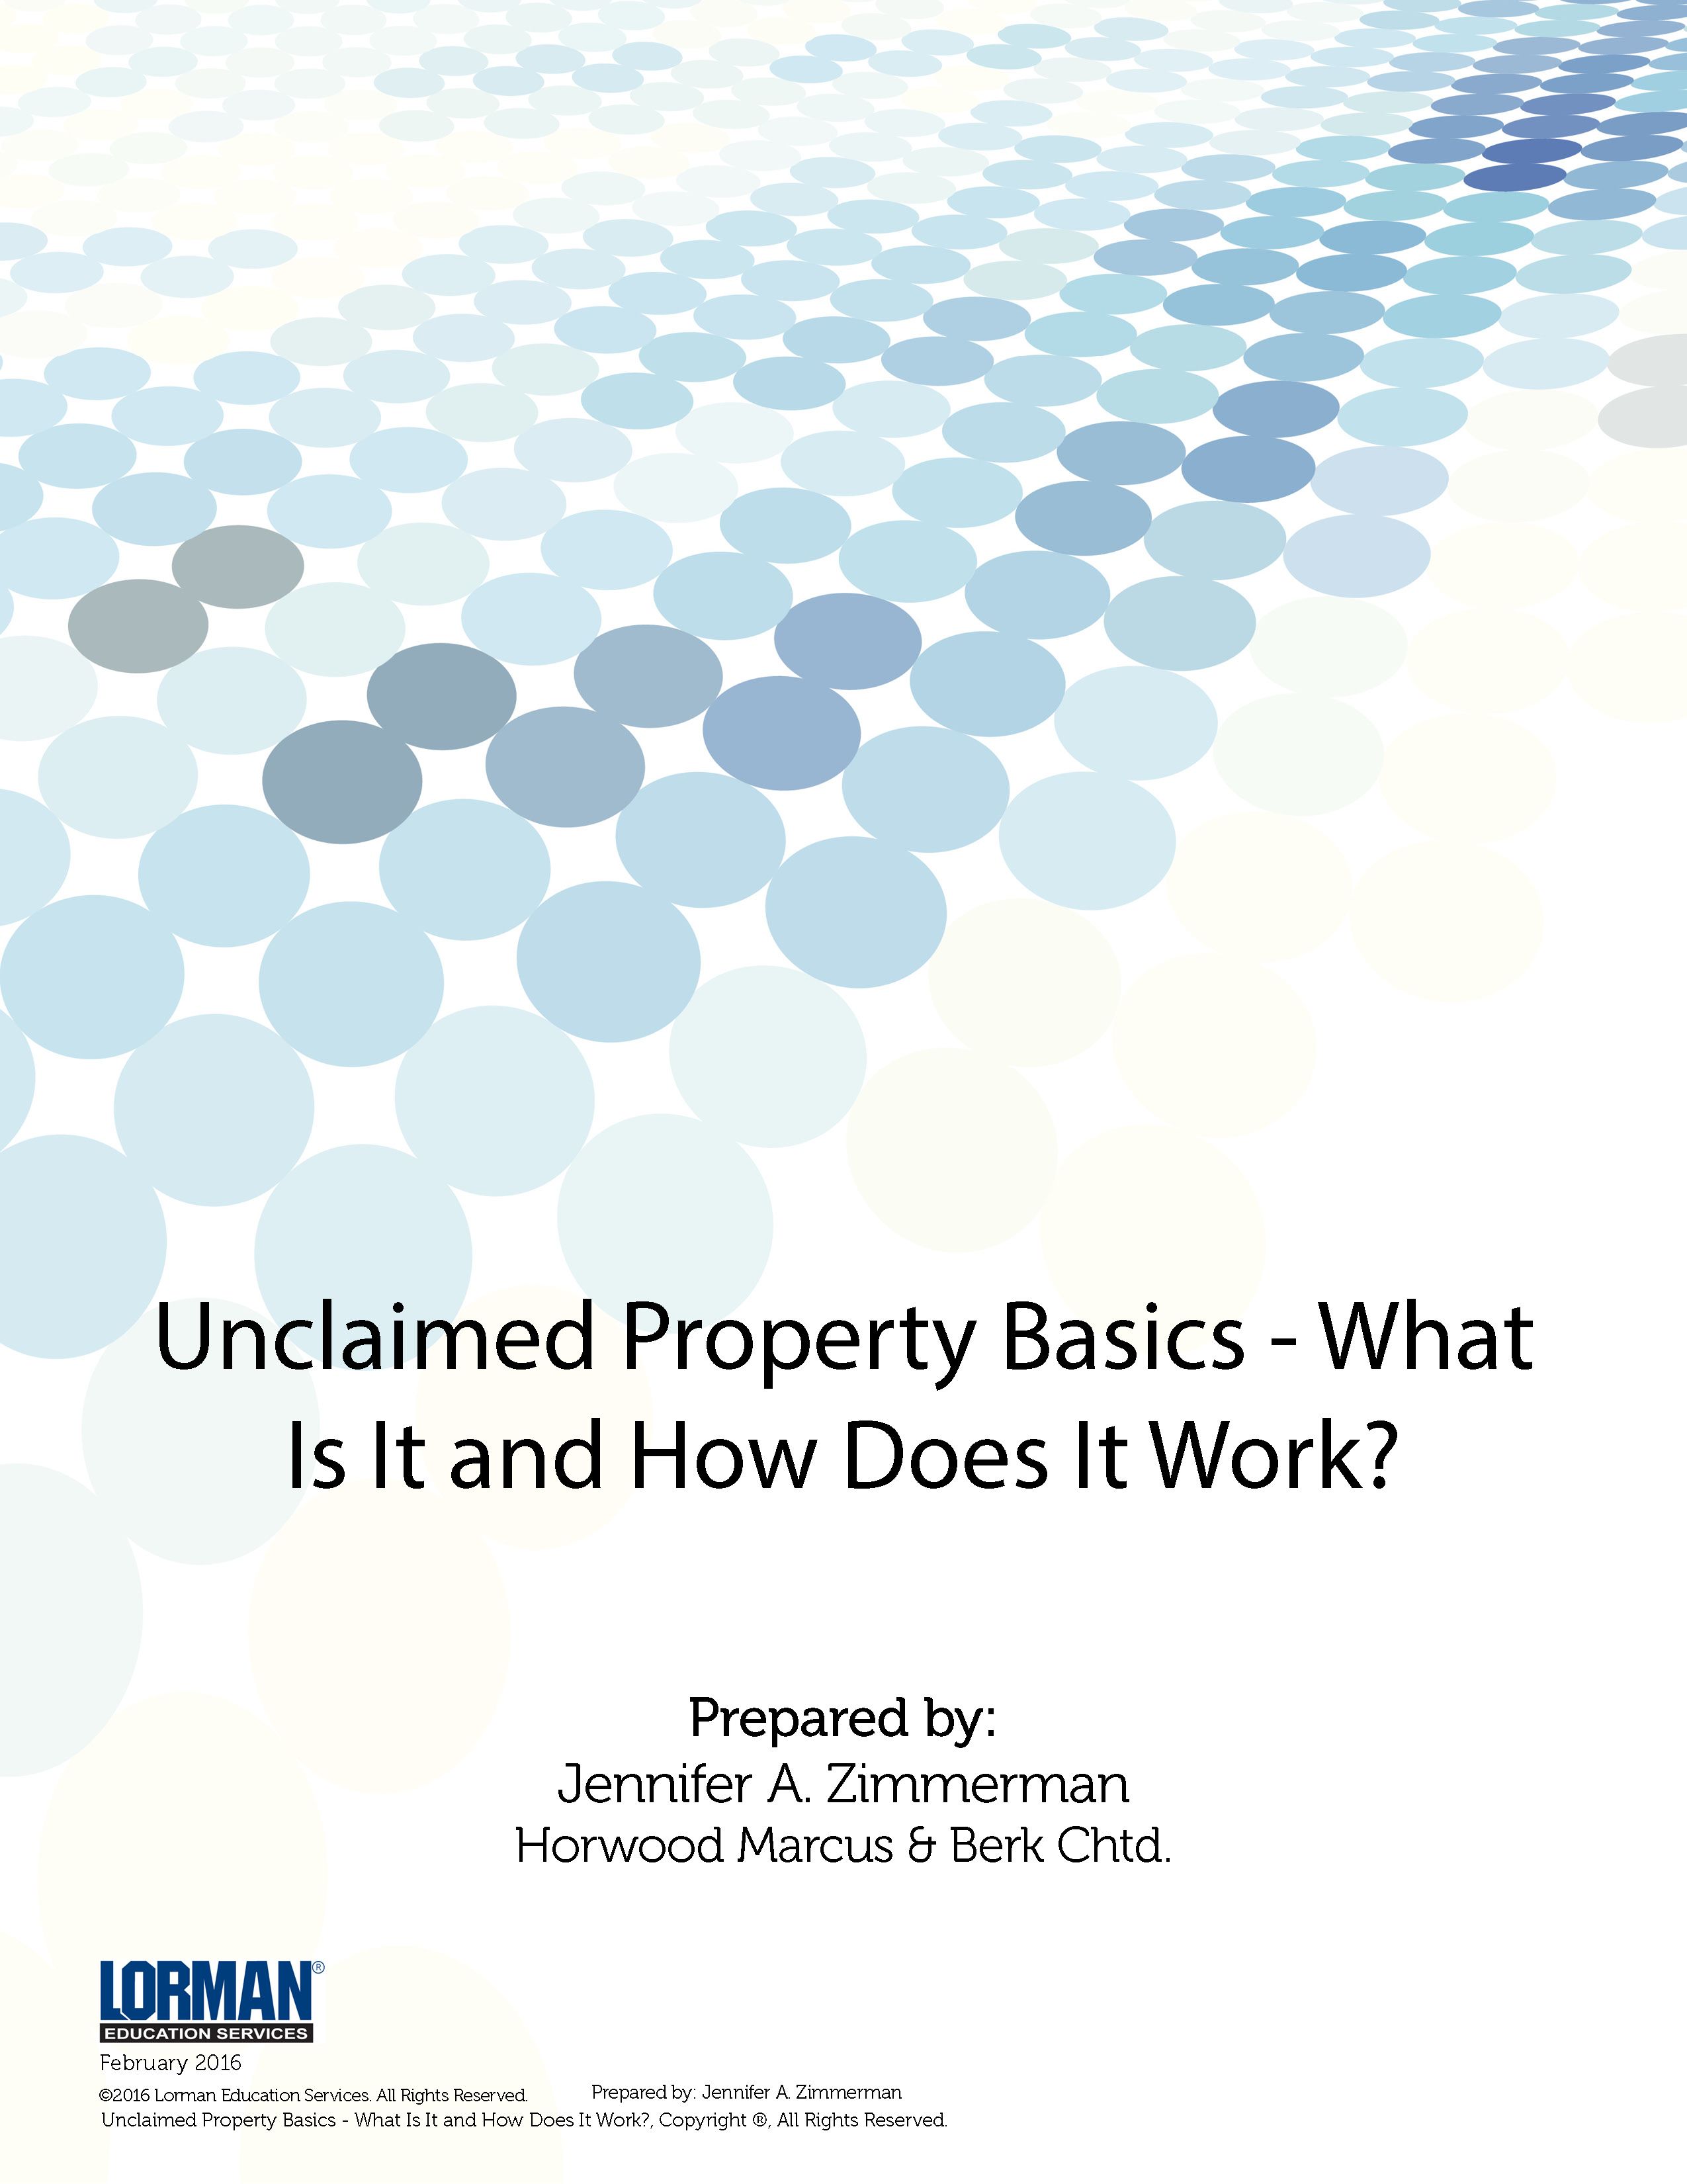 Unclaimed Property Basics - What Is It and How Does It Work